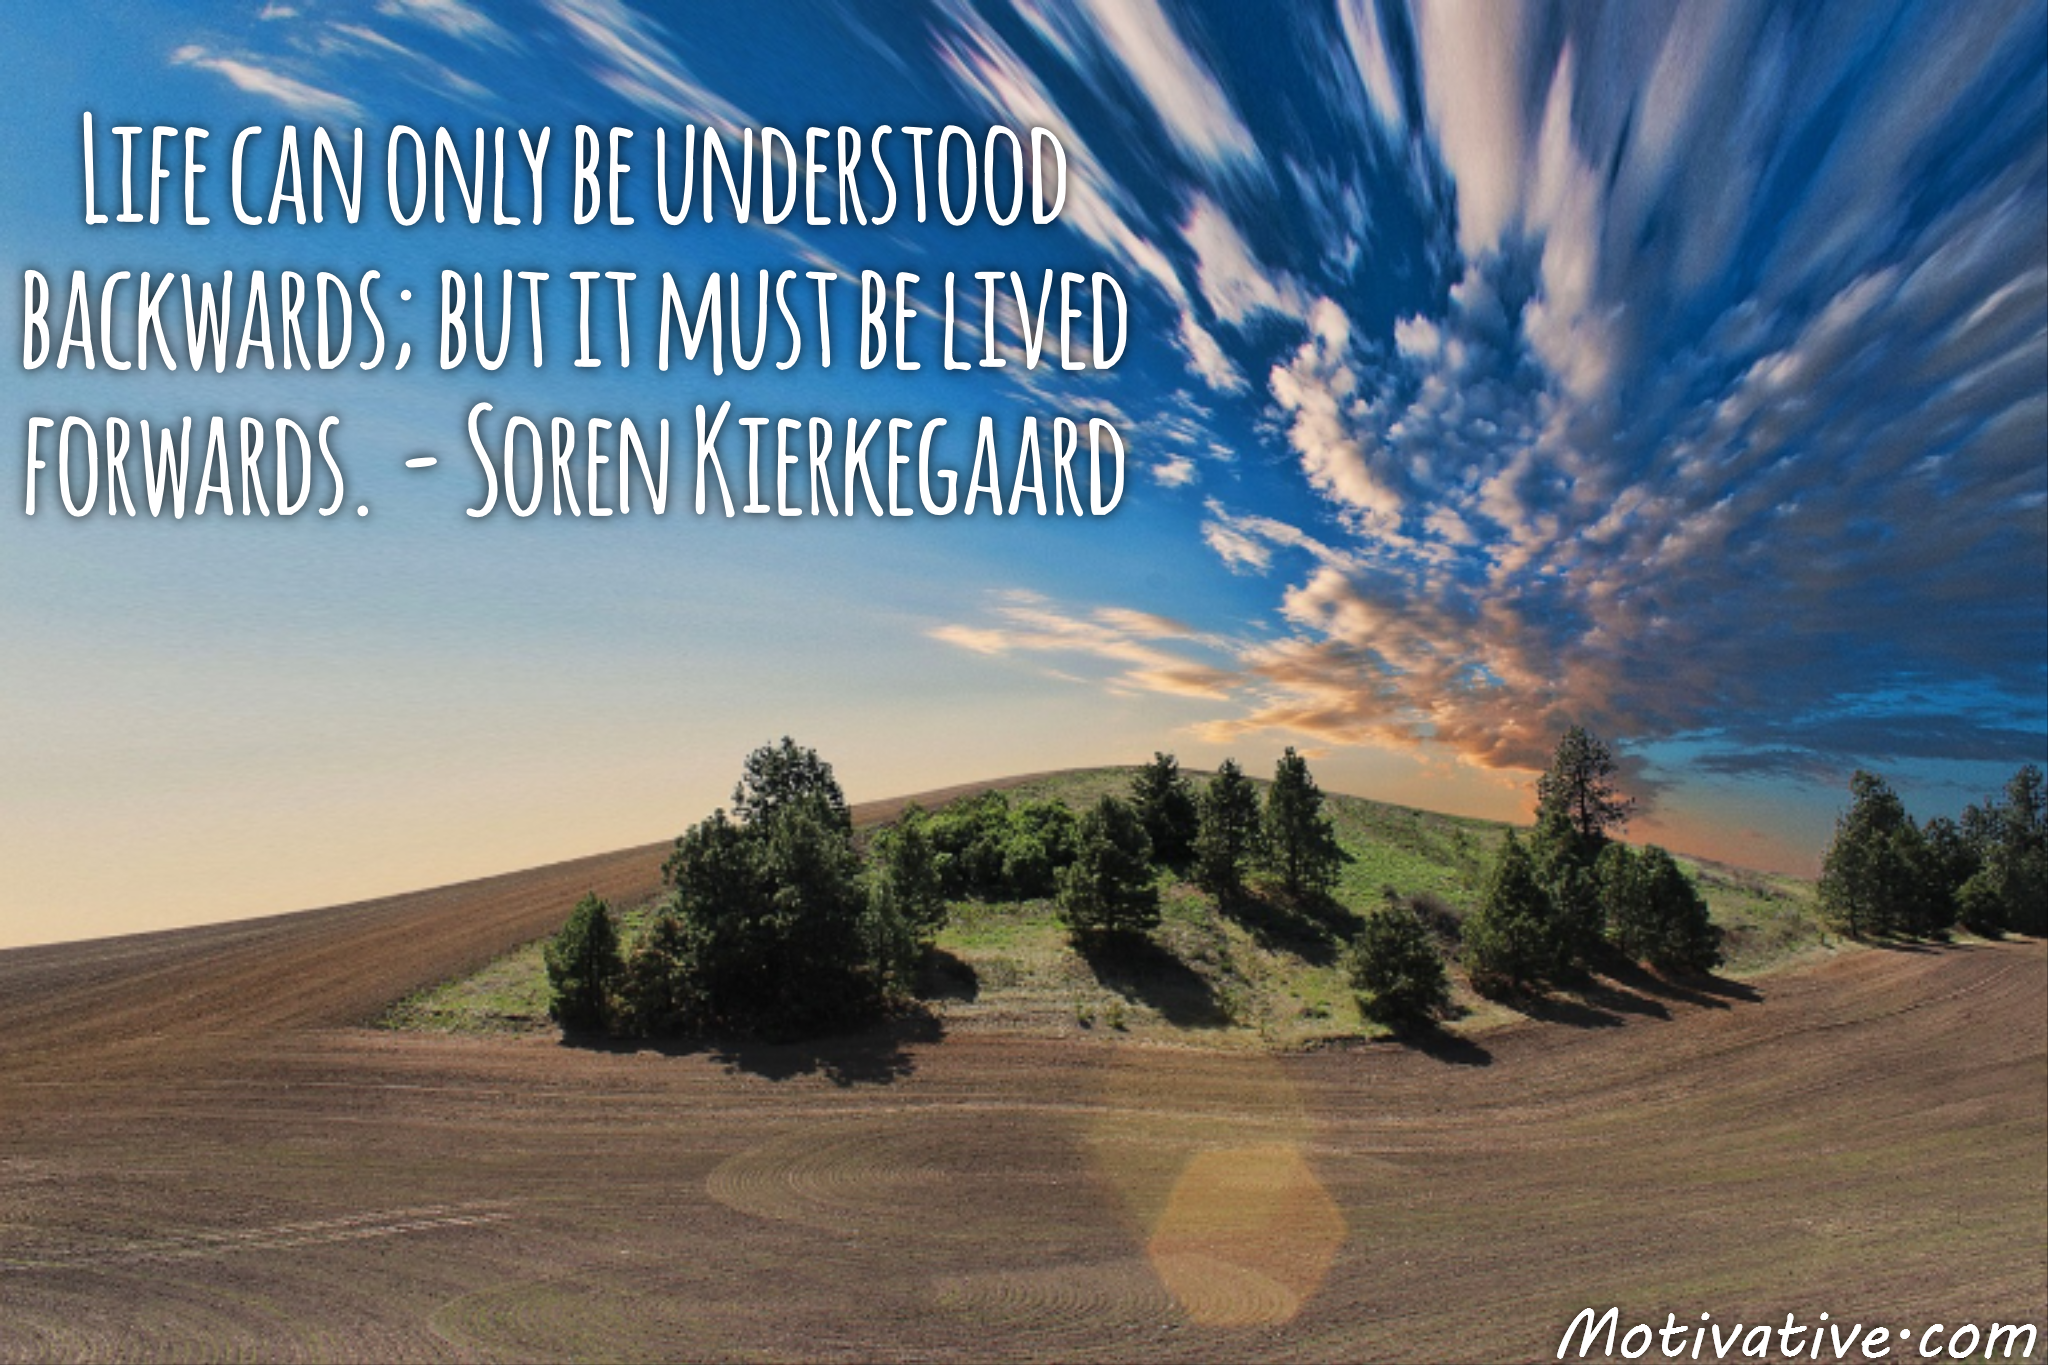 Life can only be understood backwards; but it must be lived forwards. – Soren Kierkegaard